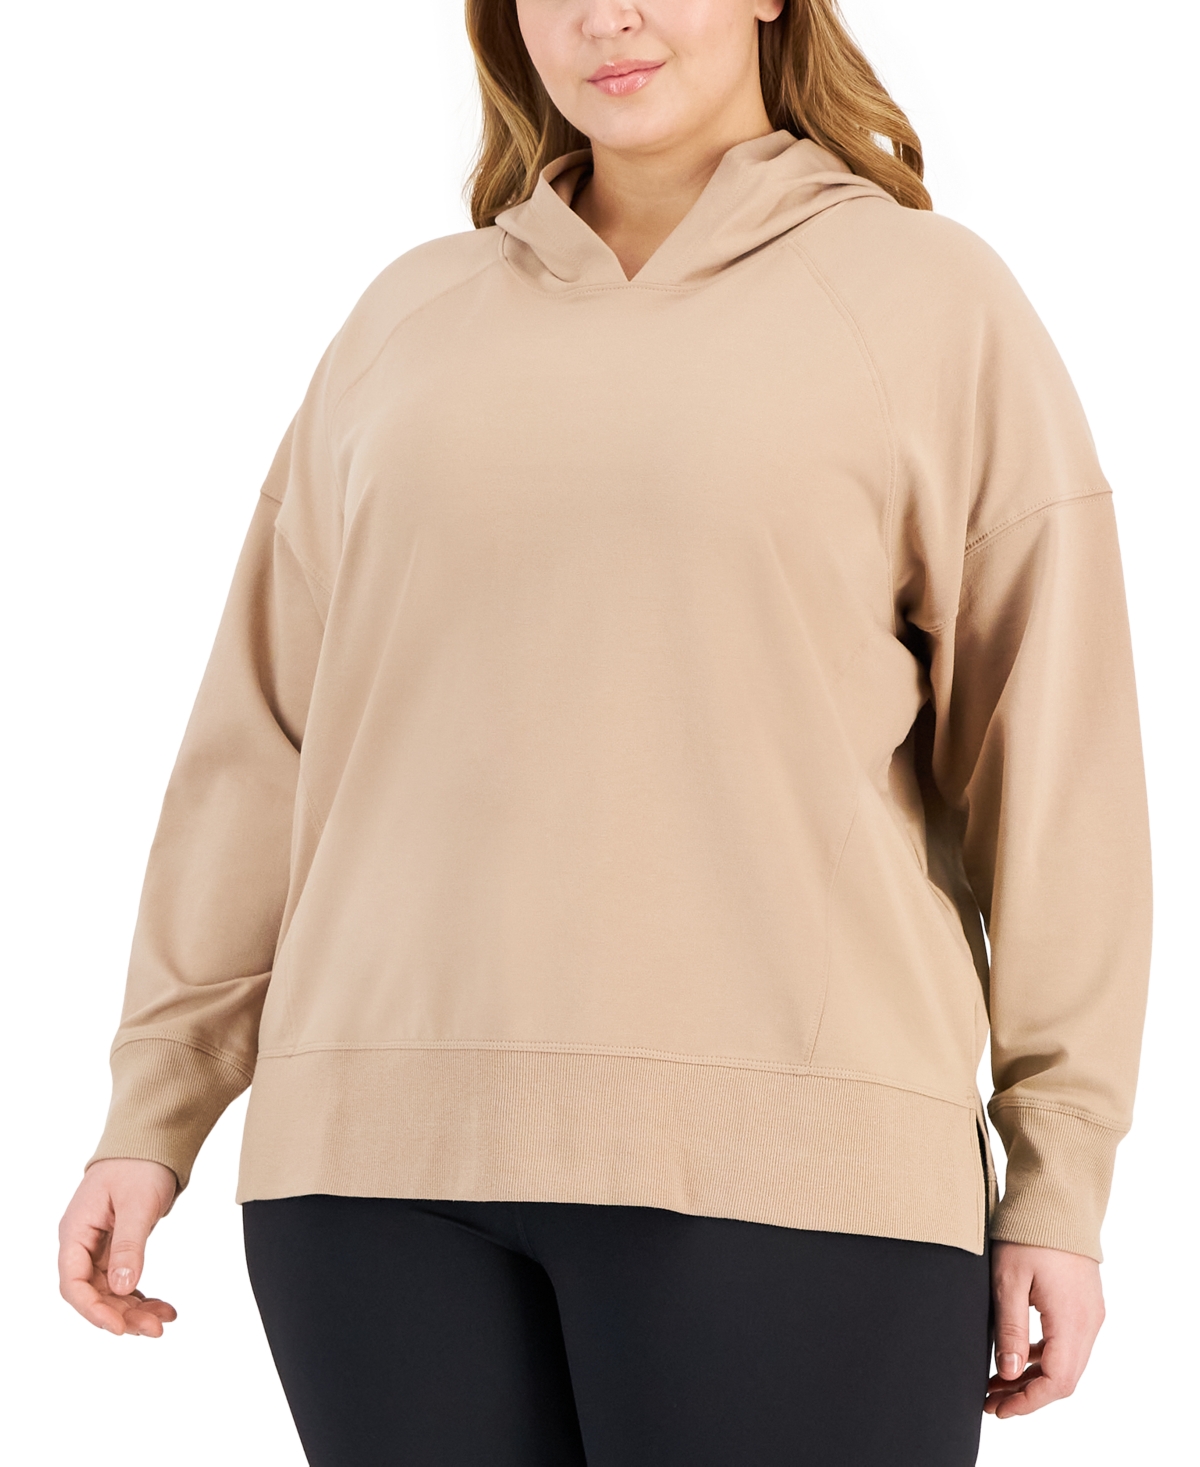 Plus Size Comfort Hooded Sweatshirt, Created for Macy's - Skysail Blue